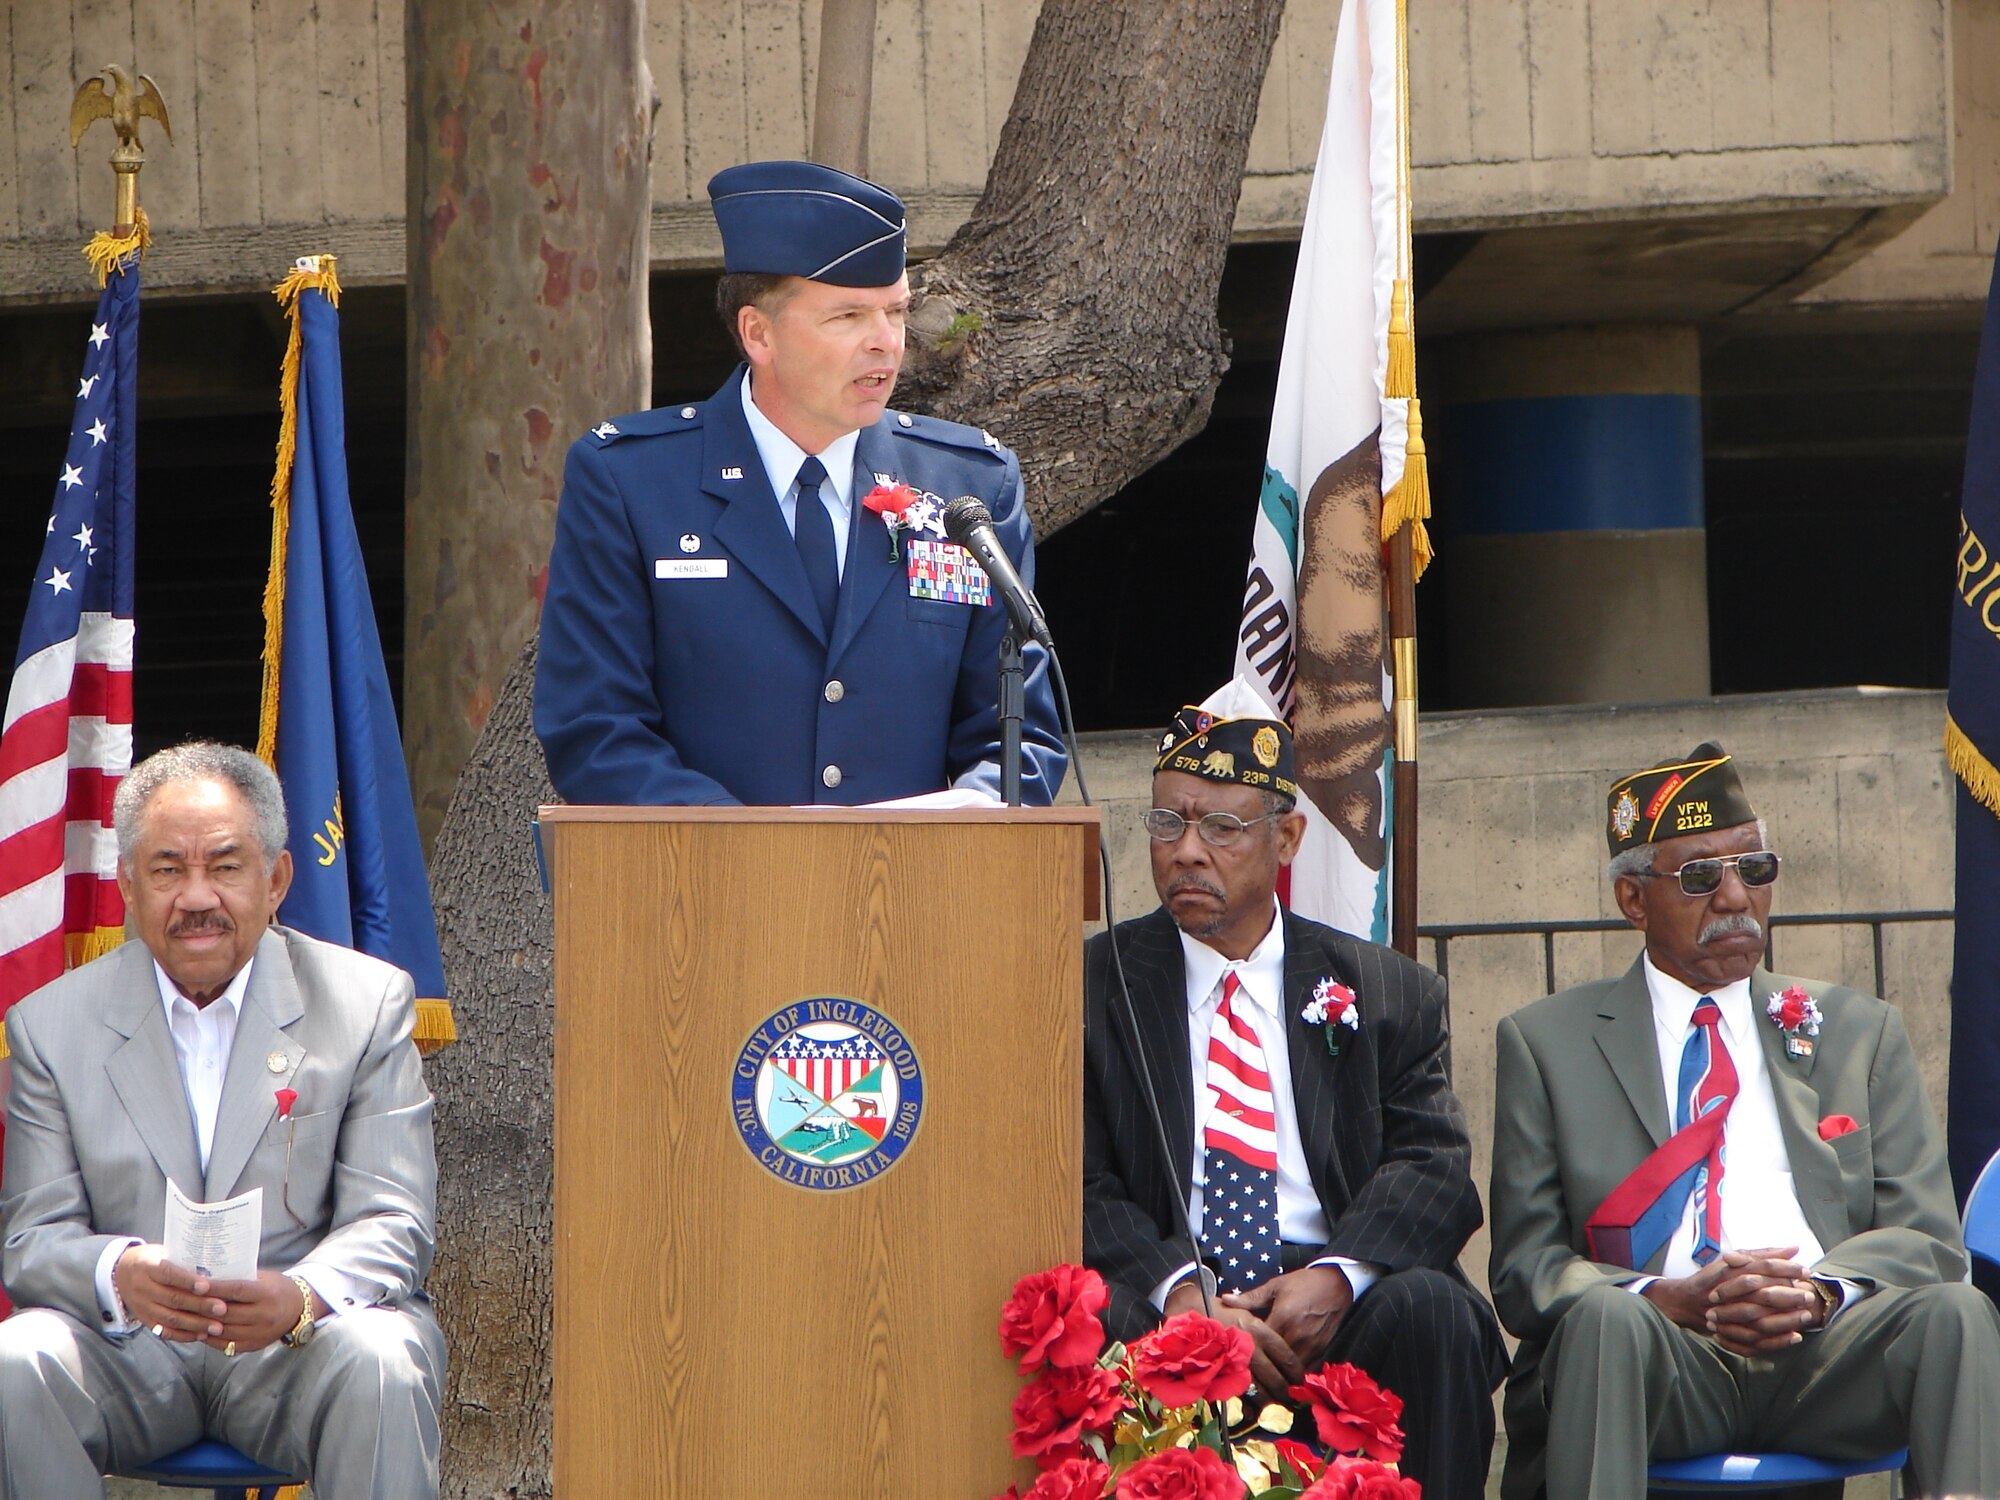 Col. Douglas Kendall, Spacelift Range Group Commander was the keynote speaker at the 59th Annual Inglewood Memorial Day Service, May 28. The service honored fallen heroes from the city and was attended by veterans who served from World War II to Operation Iraqi Freedom.